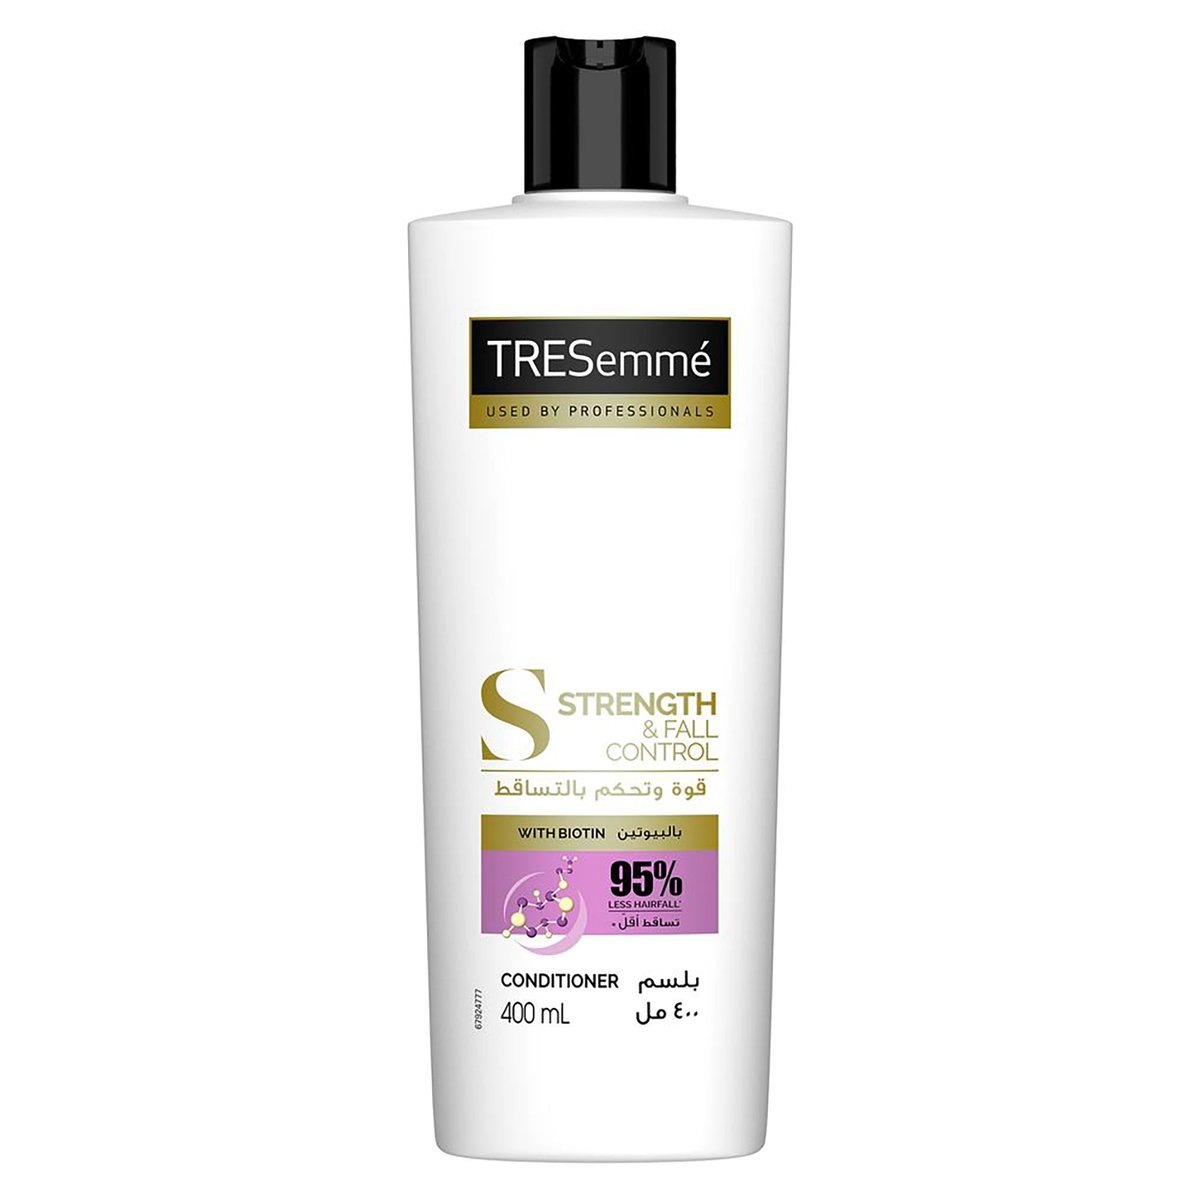 TRESemme Conditioner Strength & Fall Control, 400 ml